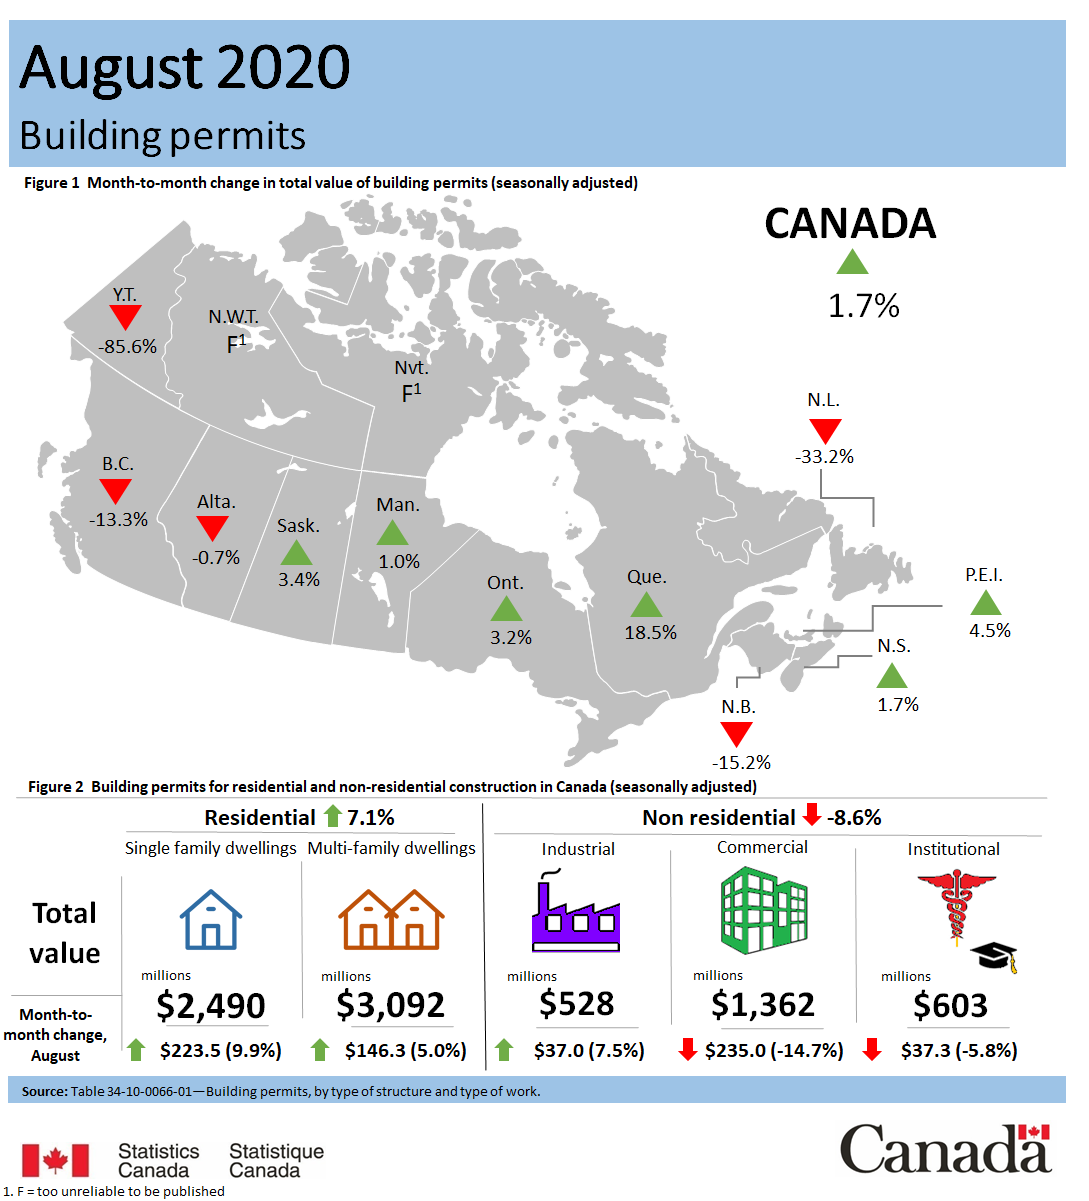 Thumbnail for Infographic 1: Building permits, August 2020